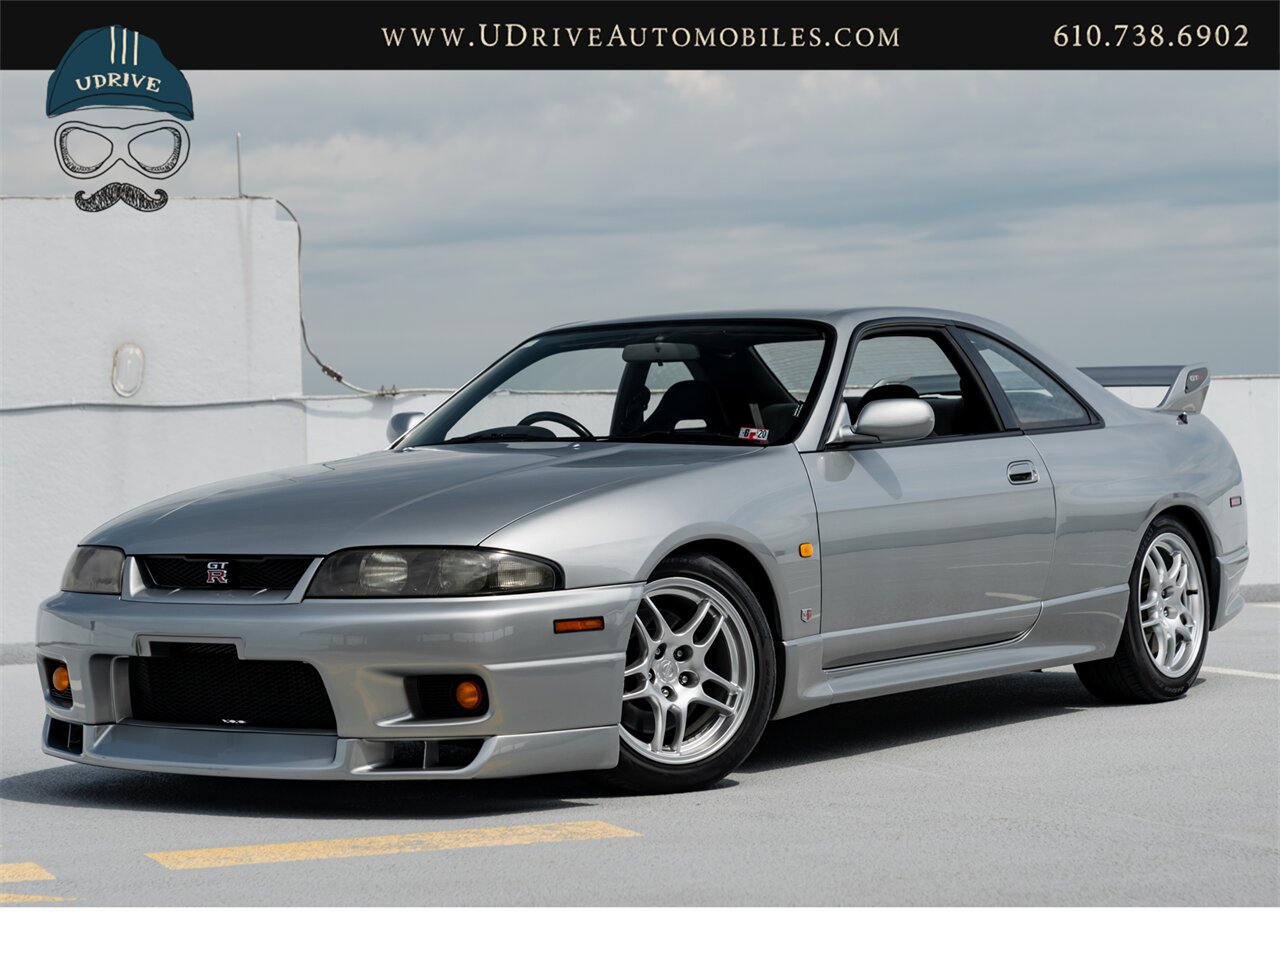 1997 Nissan Skyline GT-R R33 28k Miles Collector Grade  Motorex Legally Imported Titled Federalized Service History - Photo 1 - West Chester, PA 19382